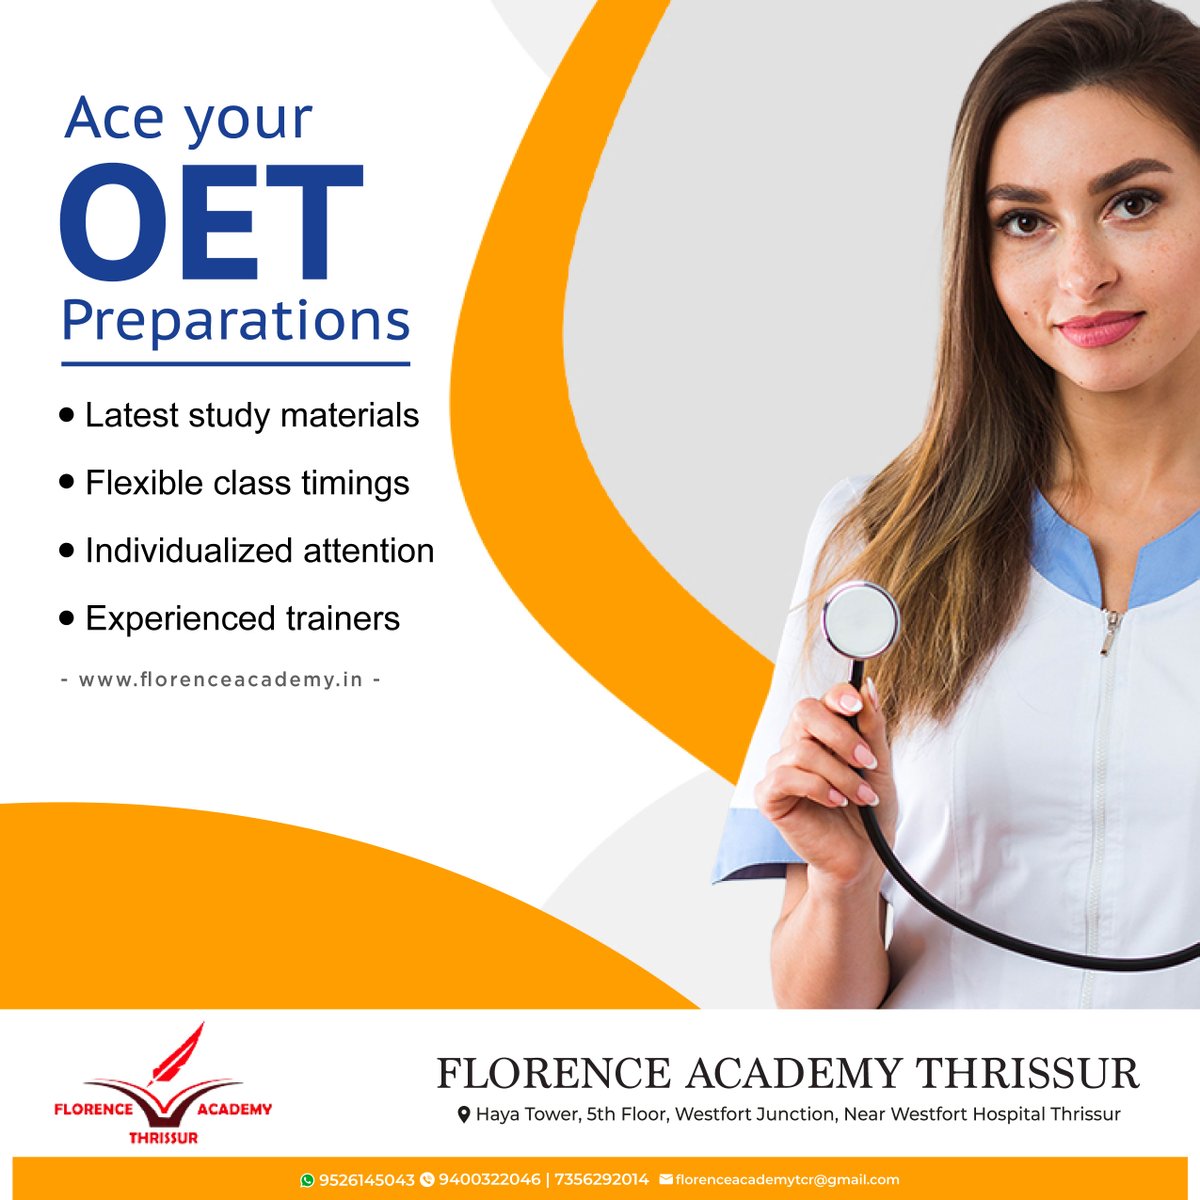 Get ready for your OET test. We are here to assist you in achieving your ideal OET grade. Let's get started right away!

#study #help #online #coaching #oetexam #oet #oetonlinecoaching #oetonlineclasses #oetresults #oetinstitute #oetinstituteindia #success #oetpreparation